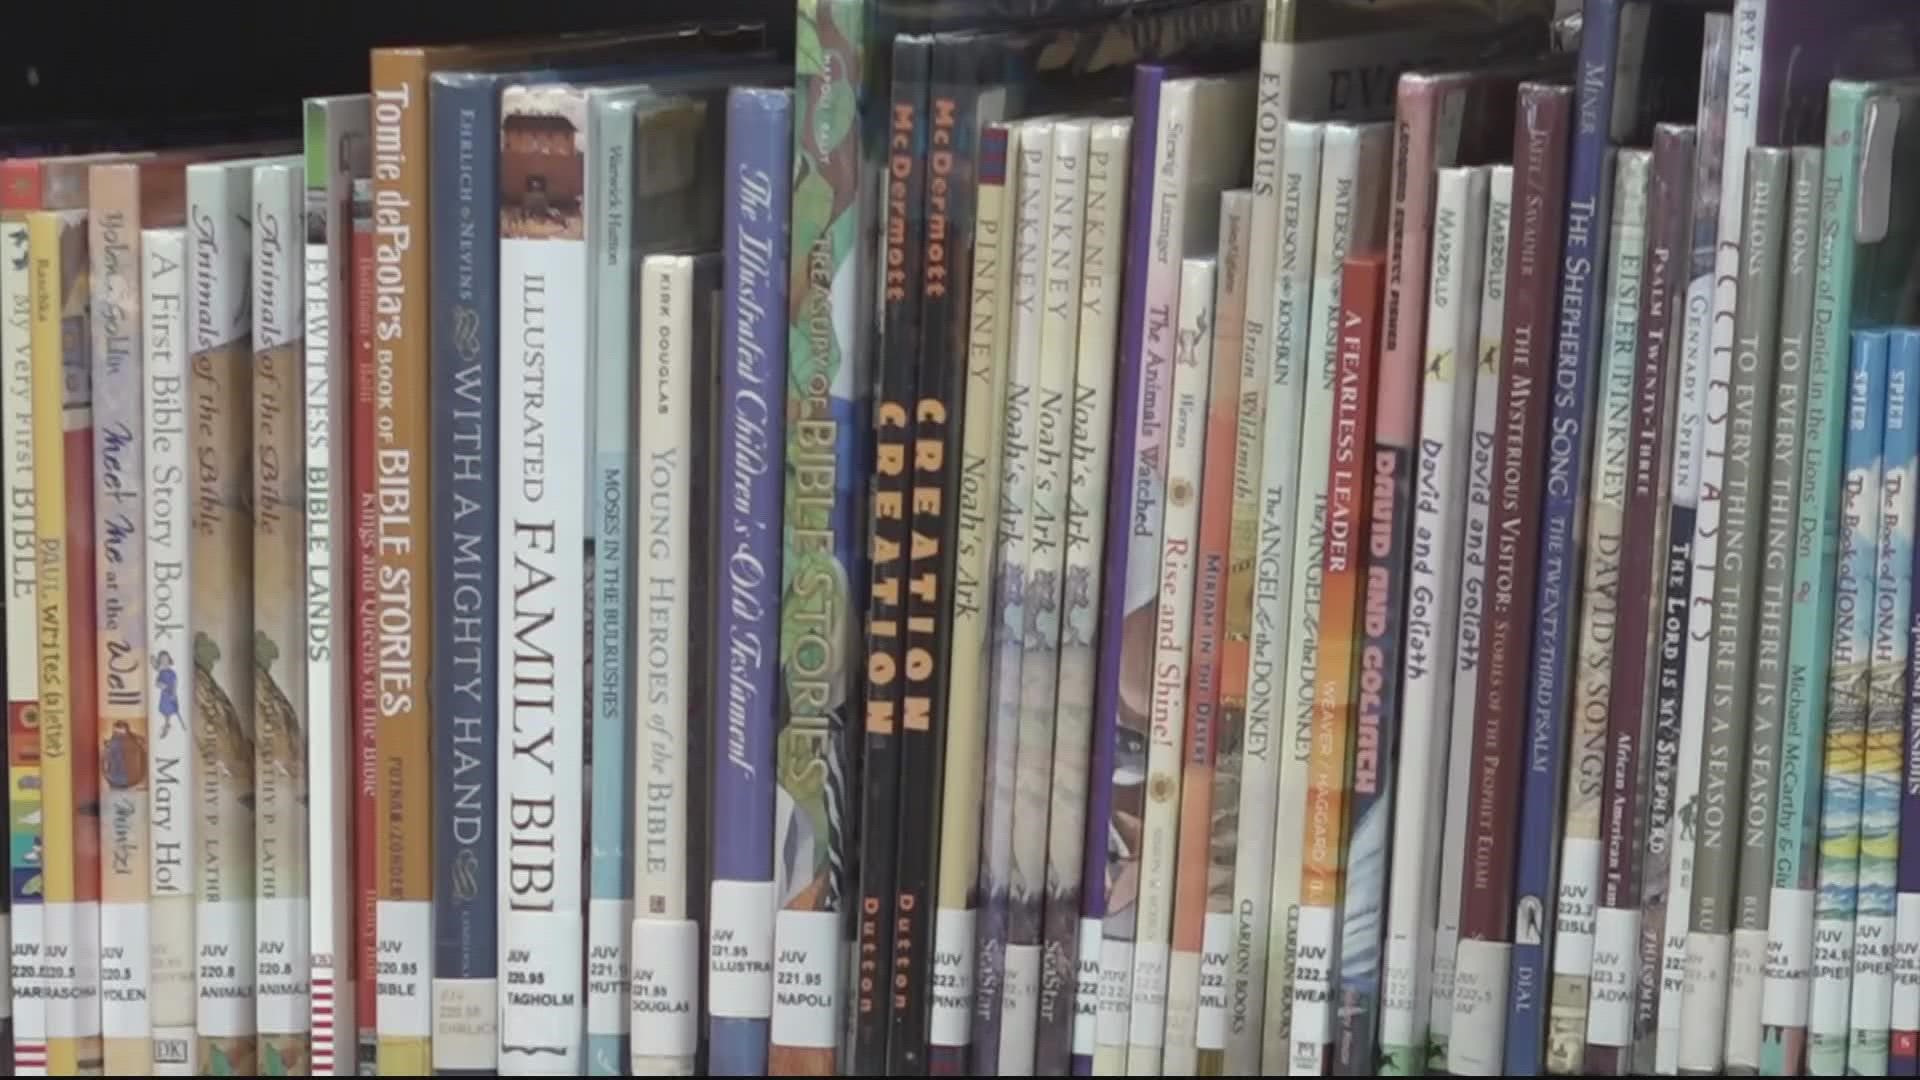 The complaints come after a school librarian read a children's book about two men falling in love during a video message last week.